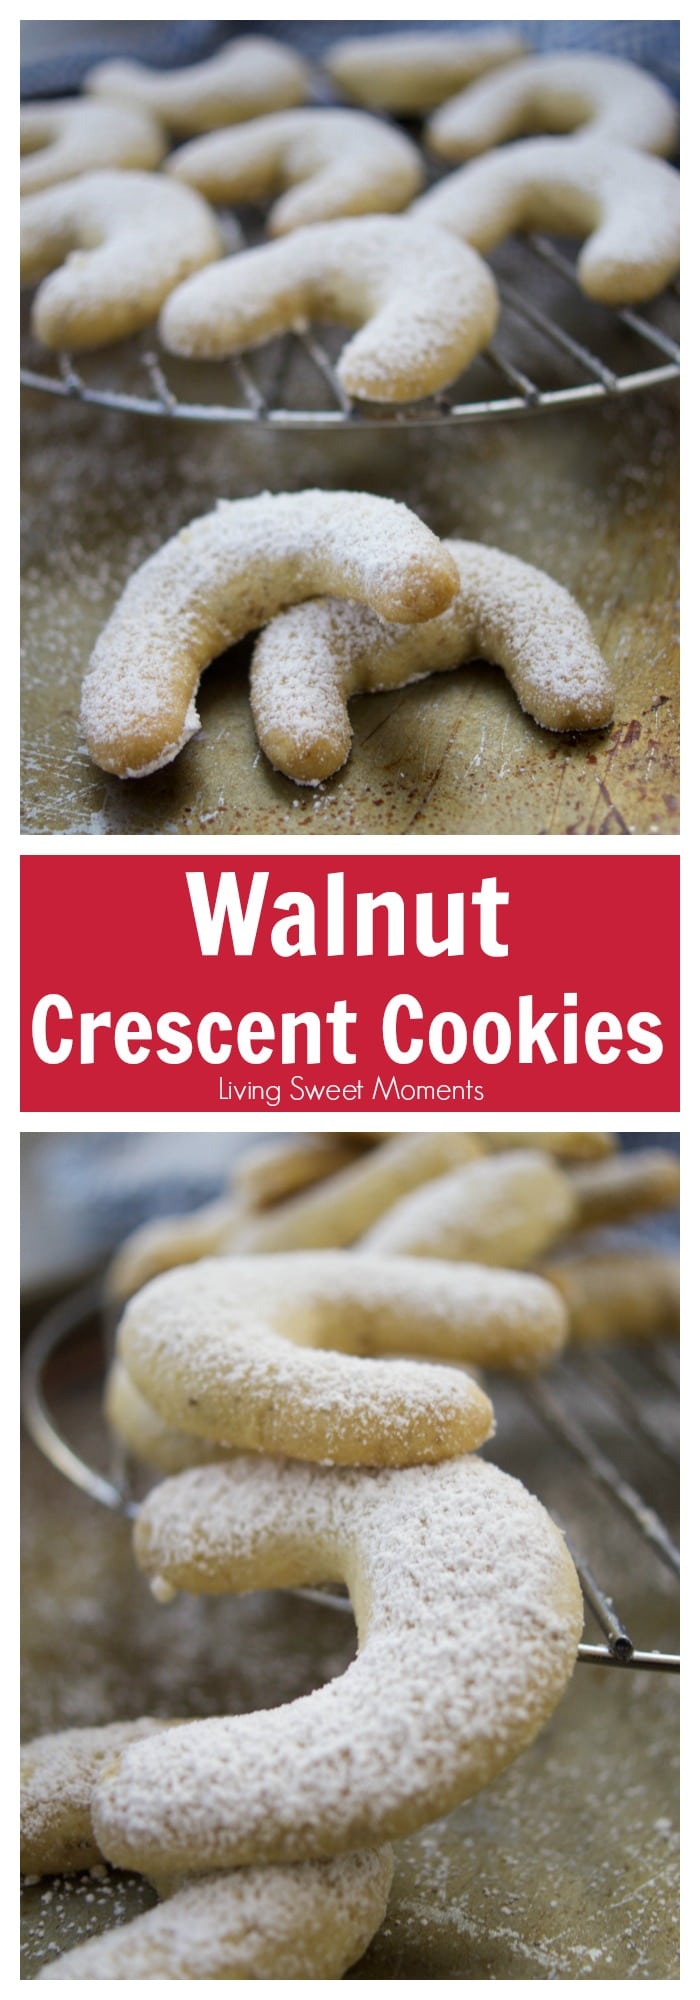 This melt-in-your-mouth crumbly Walnut Crescent Cookies recipe is super easy to make and it's the perfect dessert for the Holidays and entertaining. 